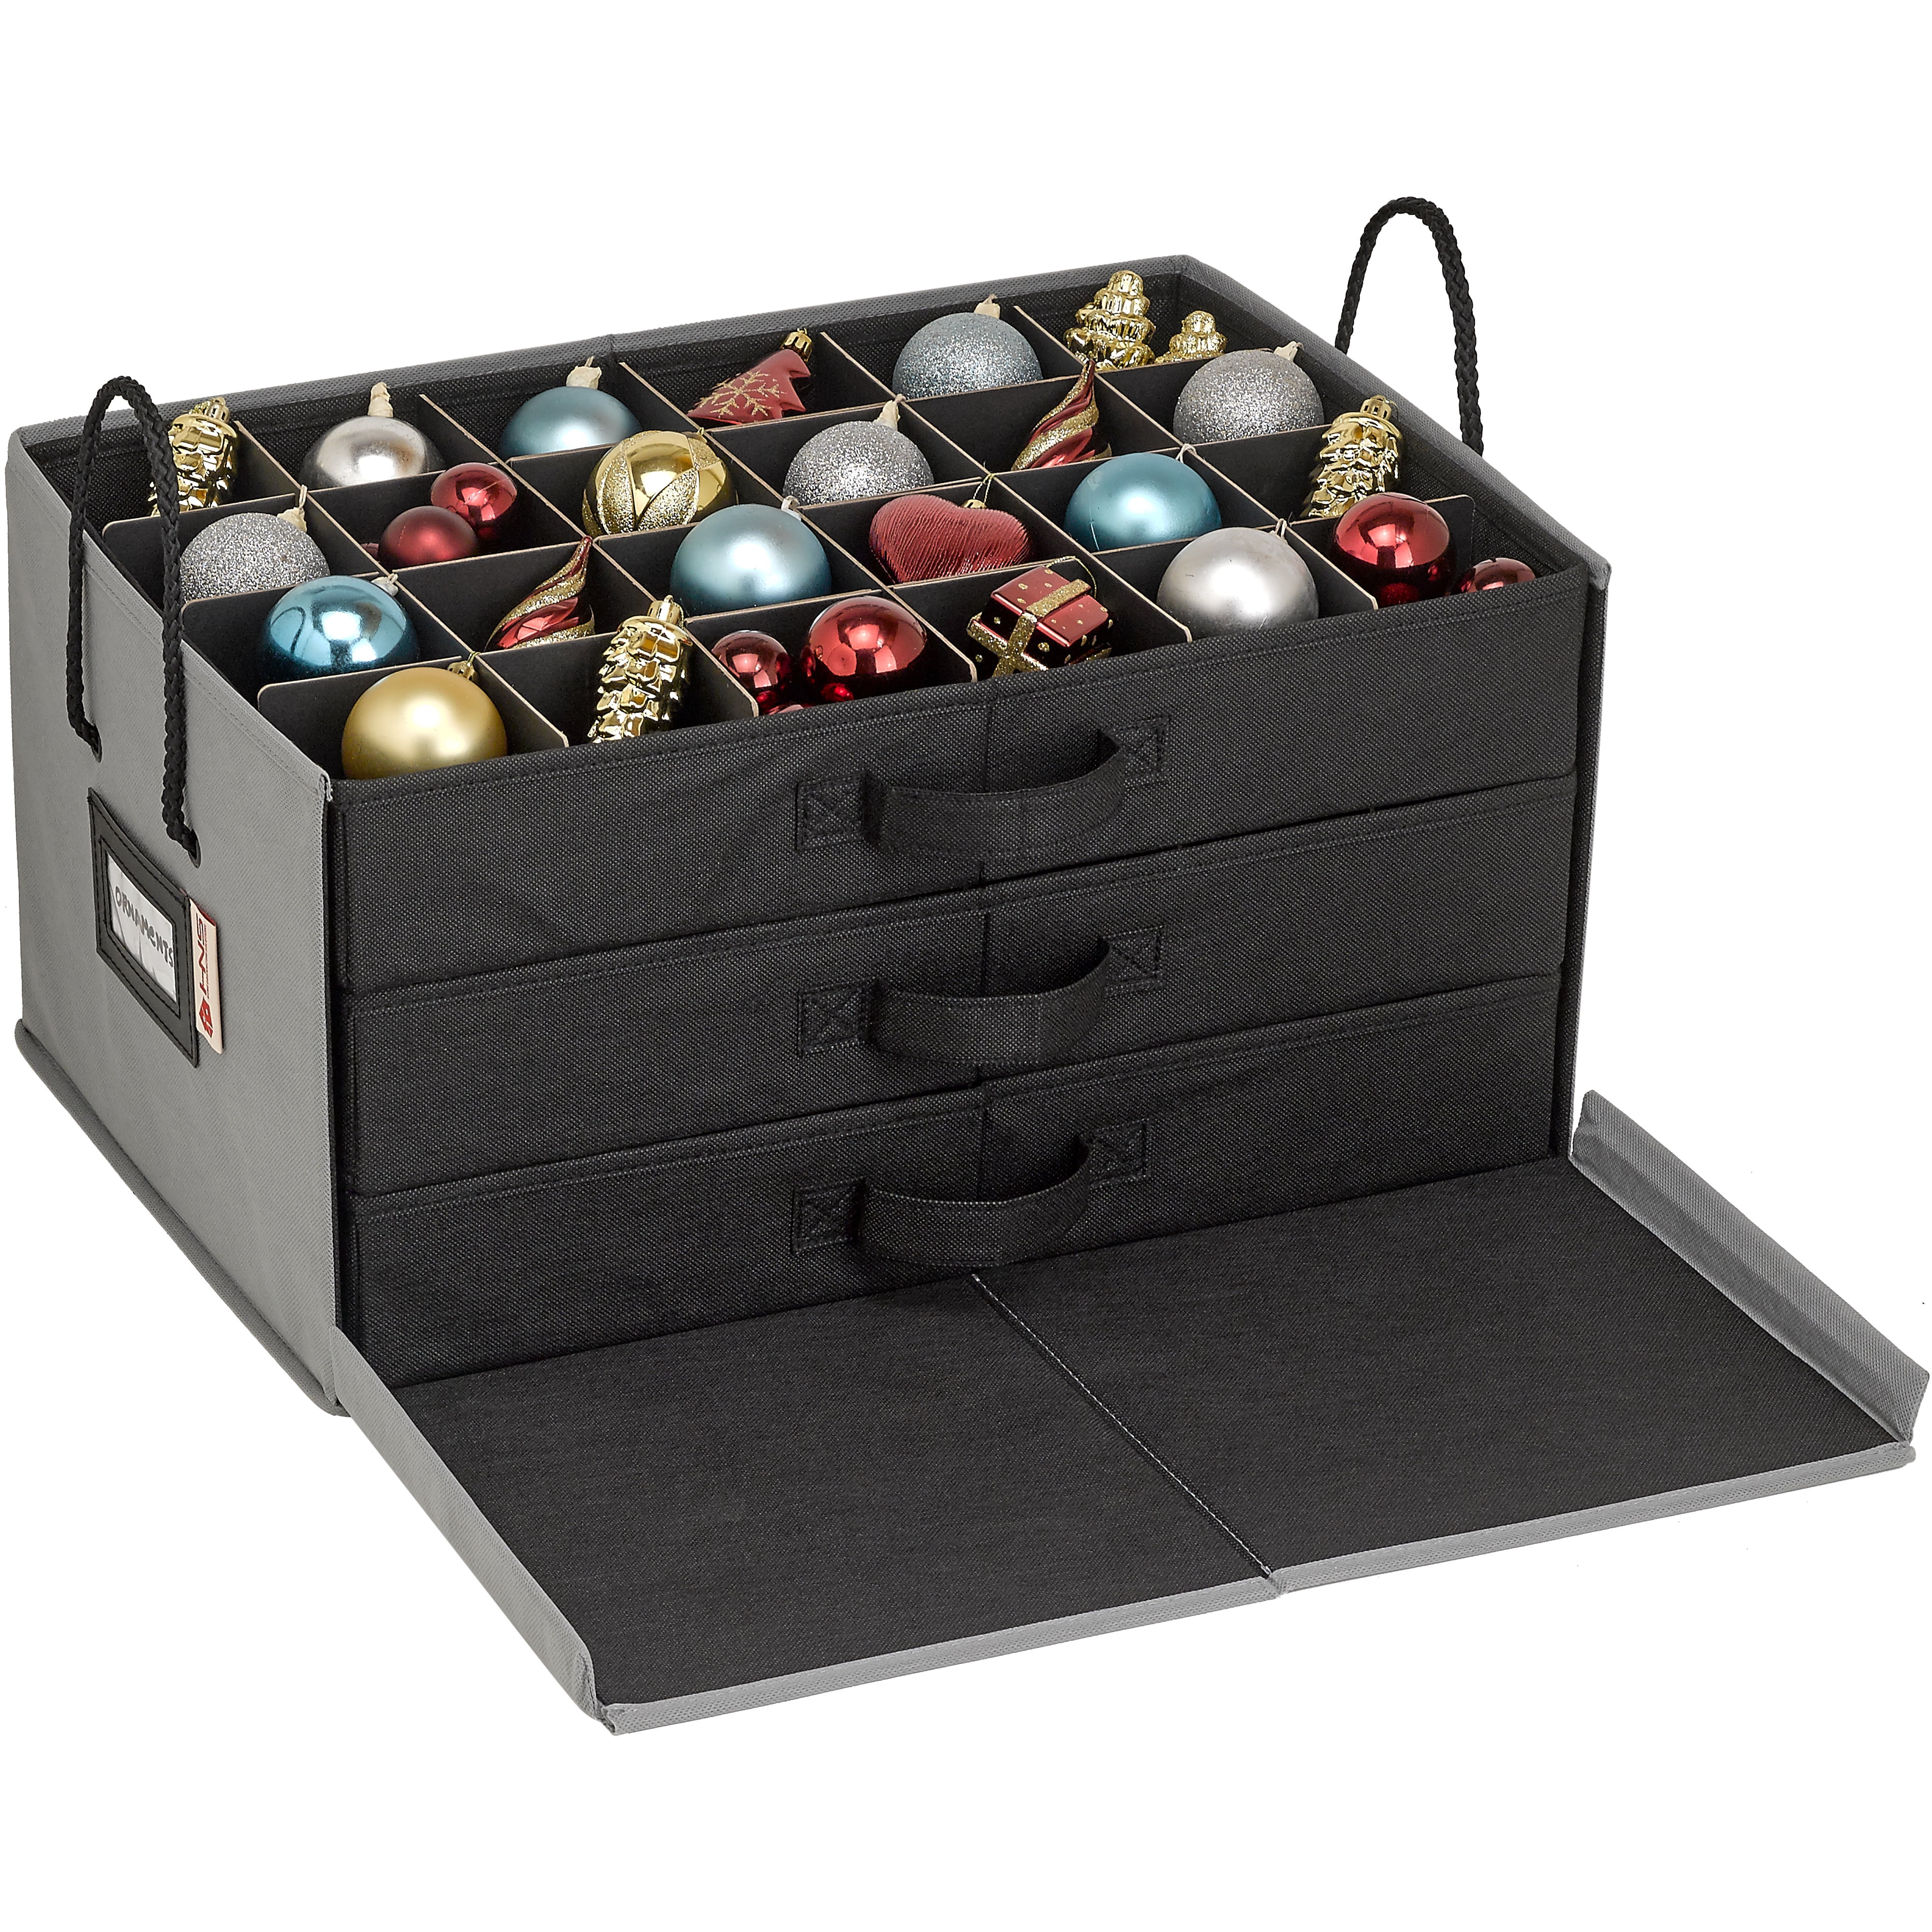 ProPik Christmas Ornament Storage Box Organizer Chest, with 3 Trays Holds Up to 75 Ornaments Balls, with Dividers to Organize (Black)